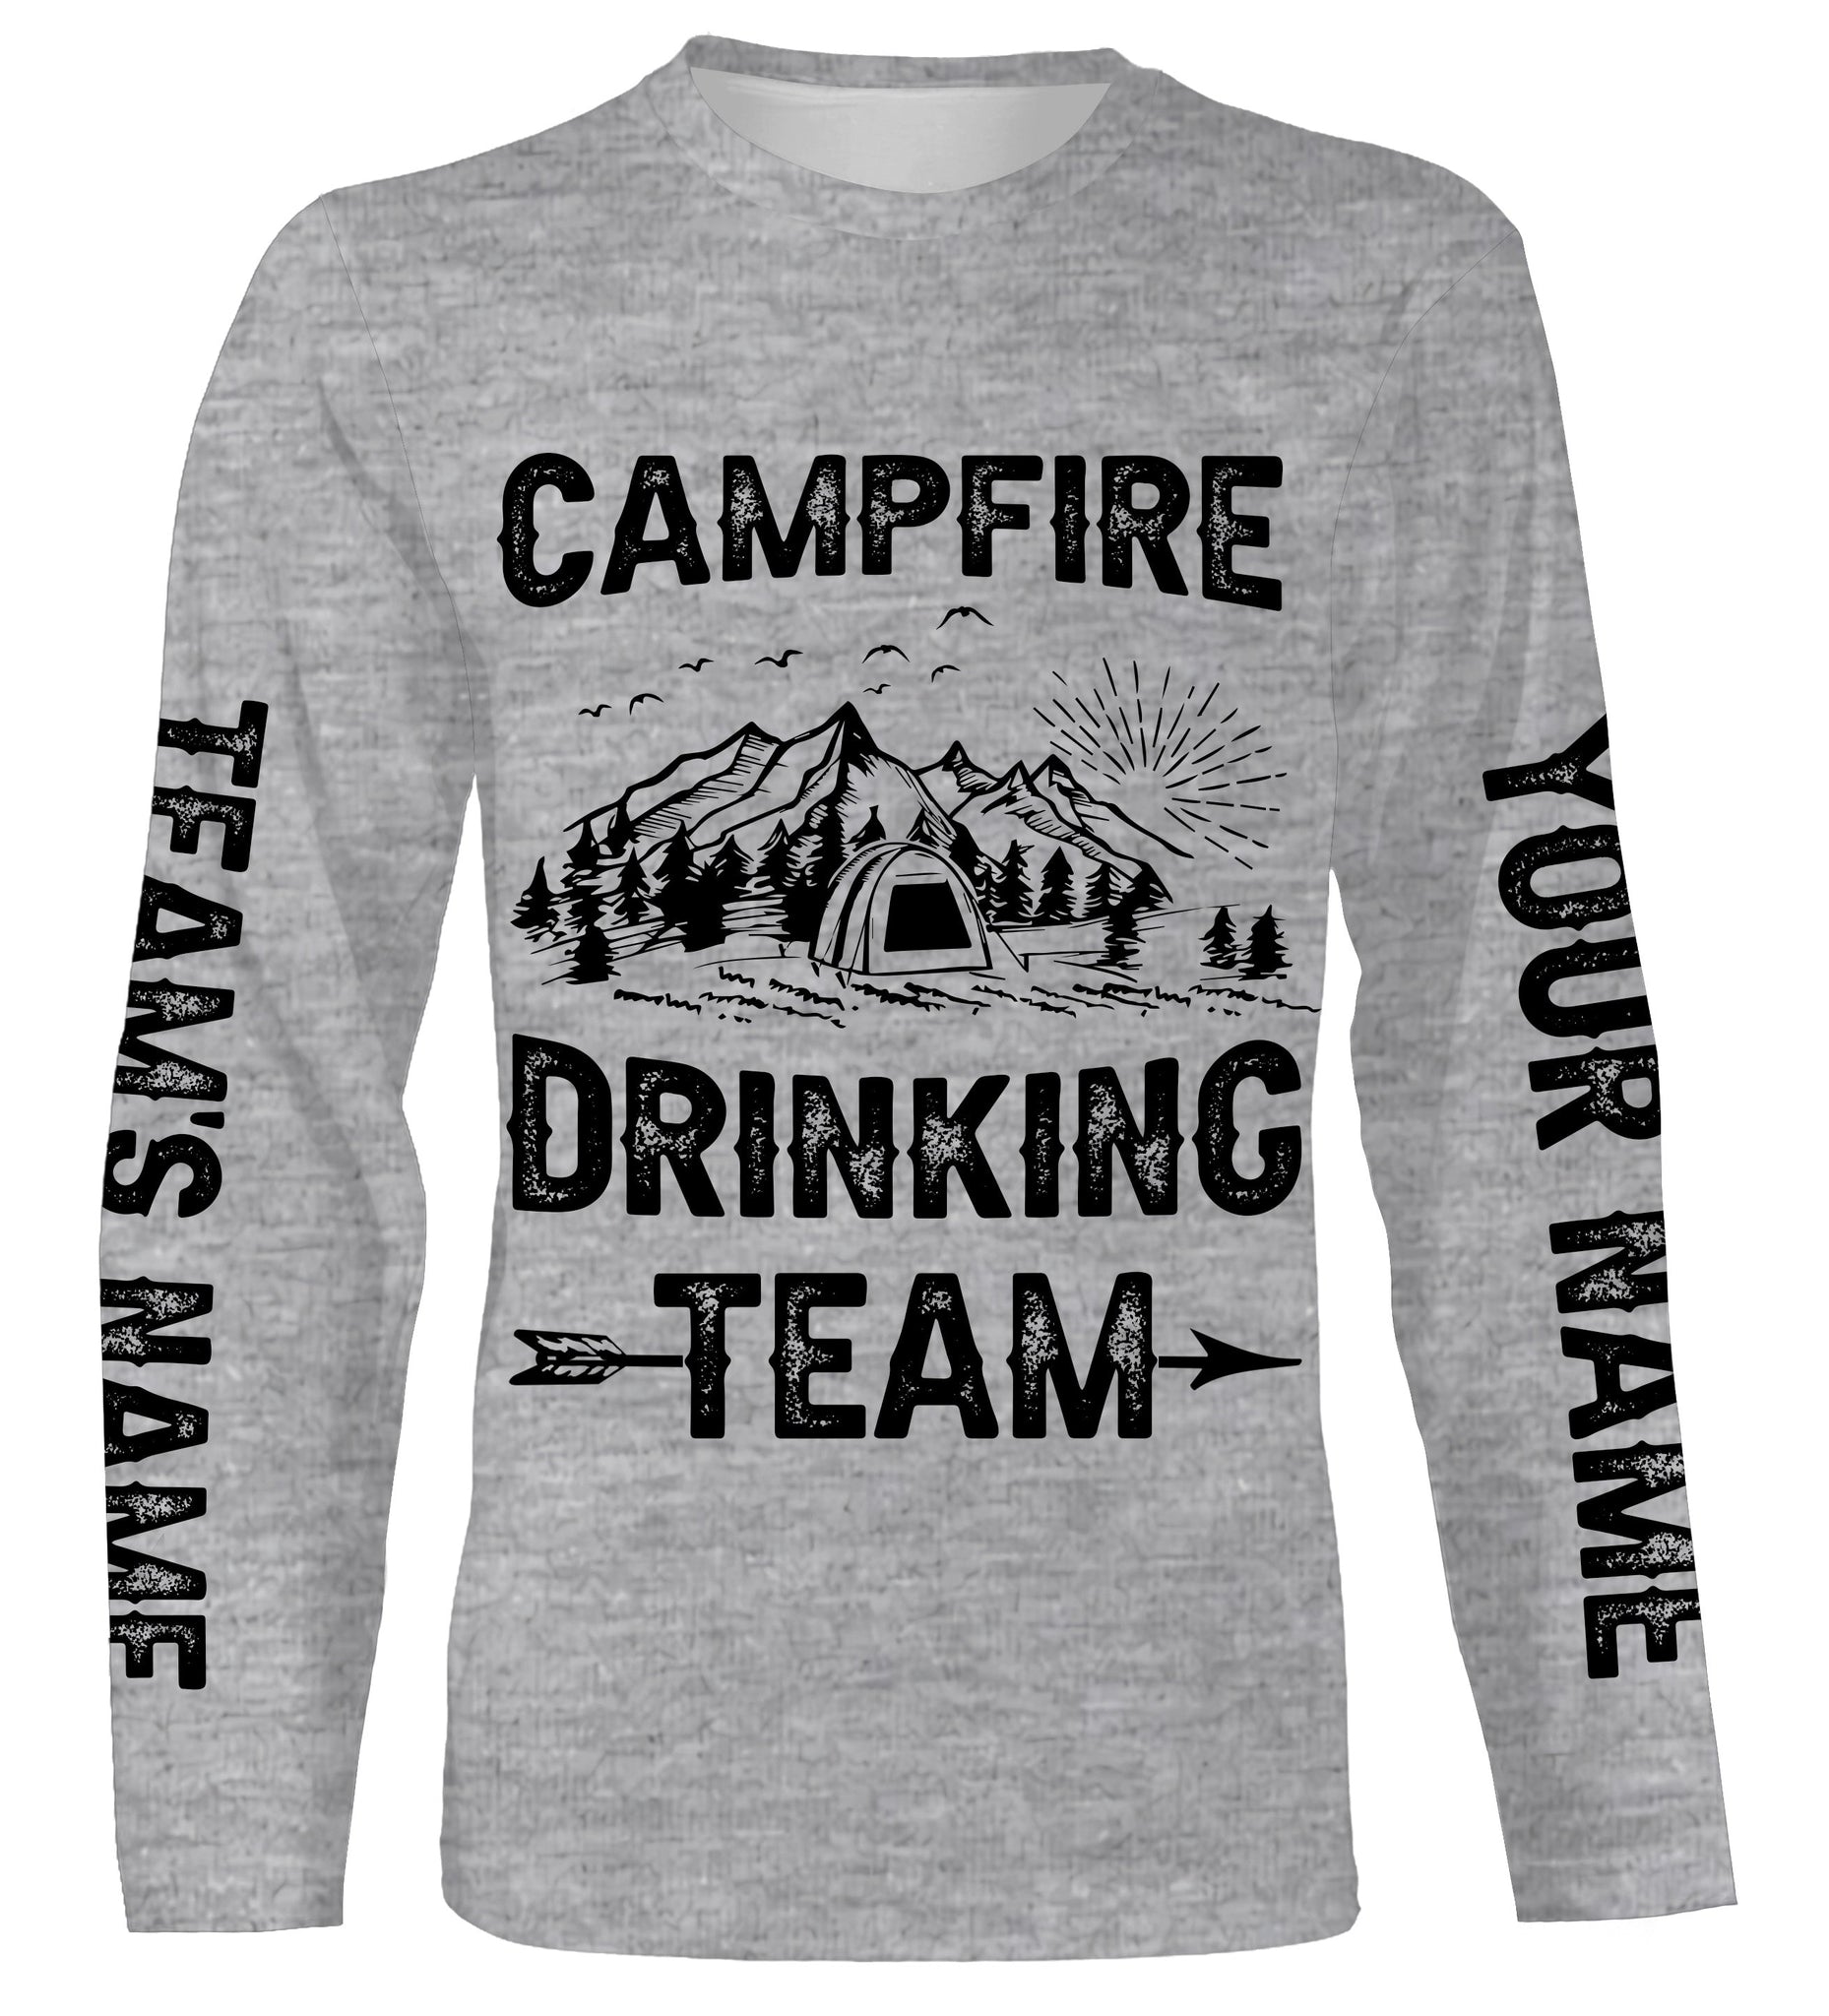 Campfire drinking team Tshirt funny camping party tee personalized long sleeve custom name and team name